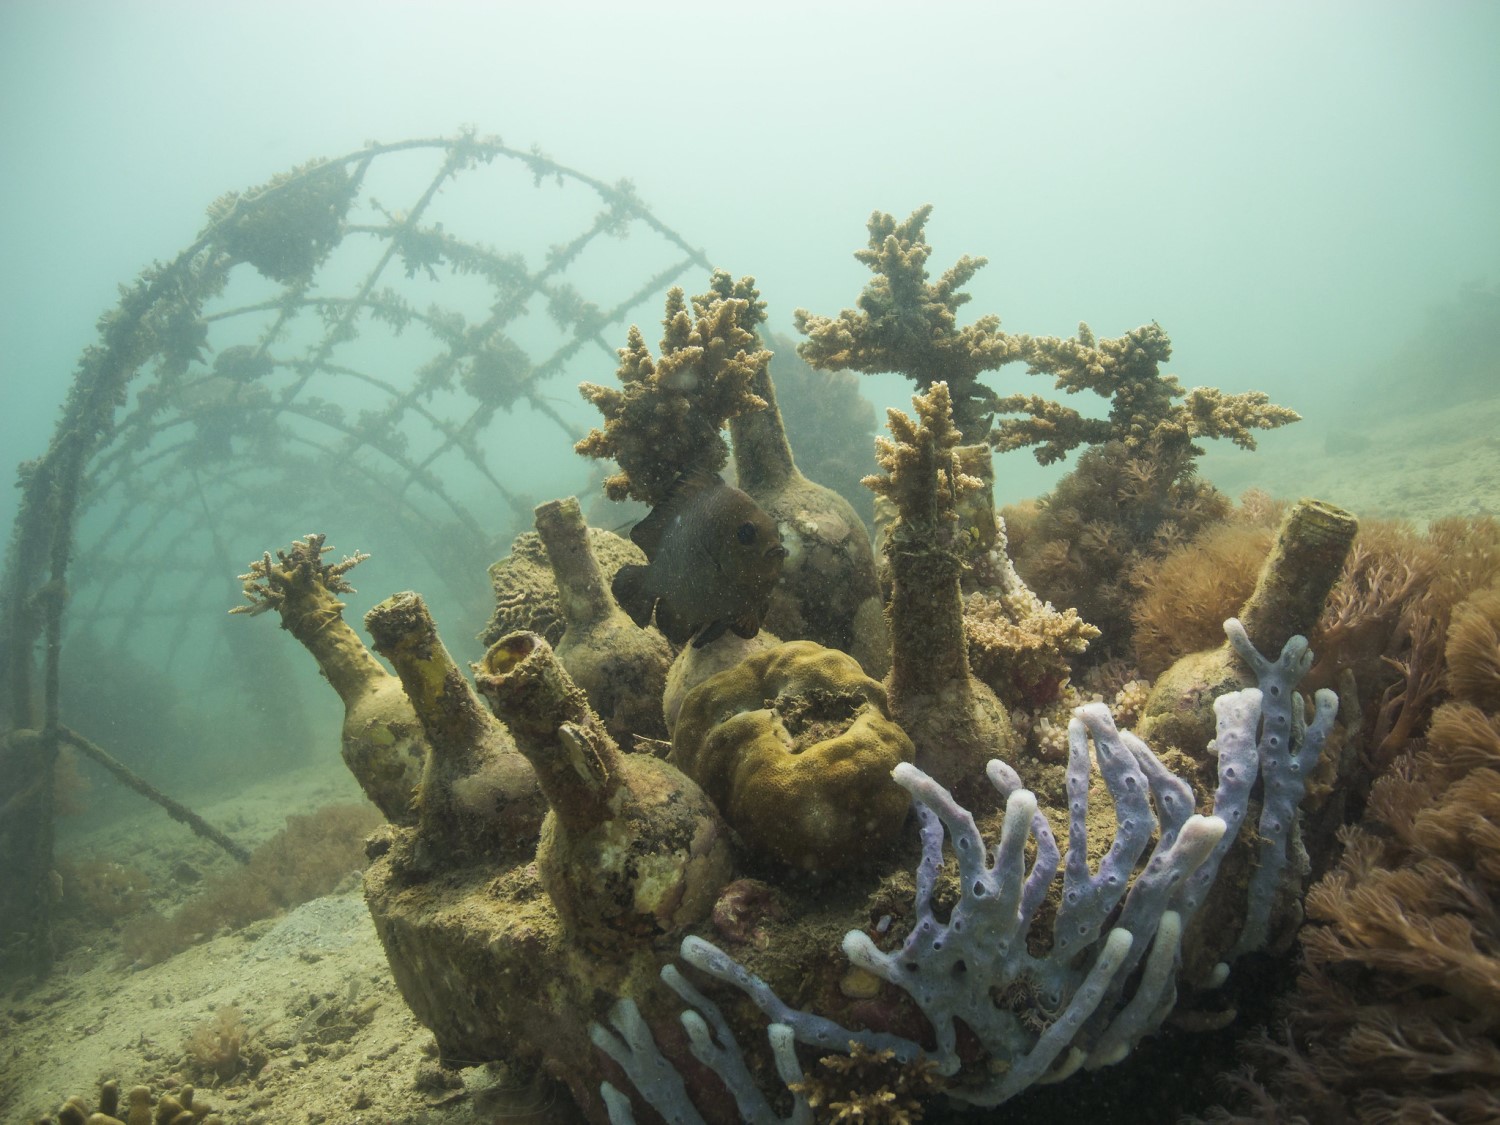 REEF DESIGN LAB  Artificial Reefs & Marine Infrastructure Solutions